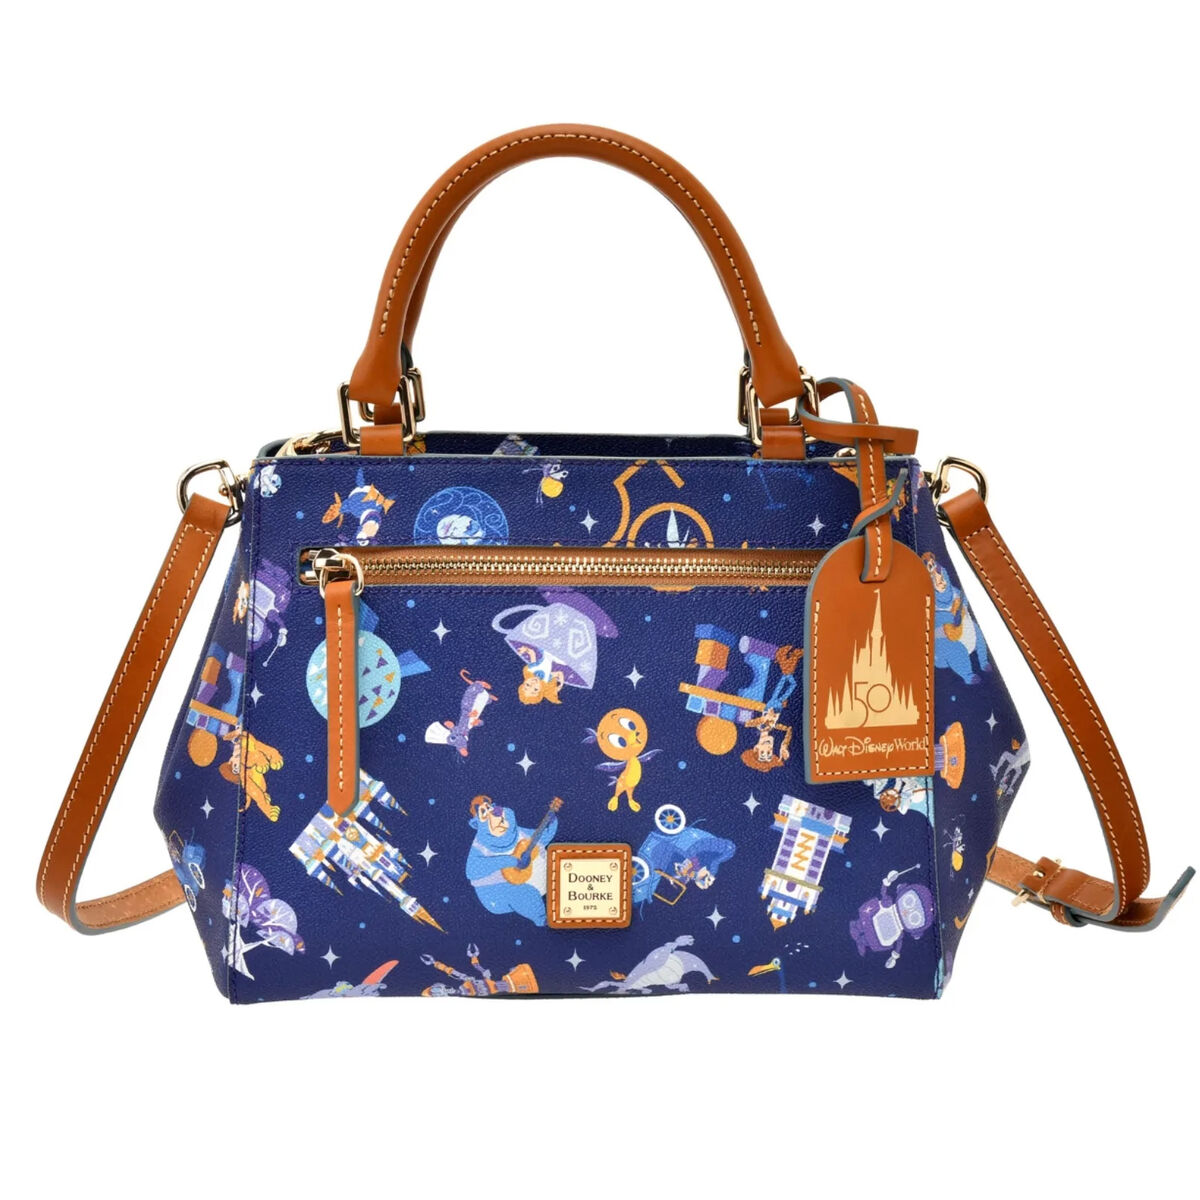 Walt Disney World 50th Anniversary Dooney & Bourke Magicband and Bag  Collection Debuts in Parks and On shopDisney 